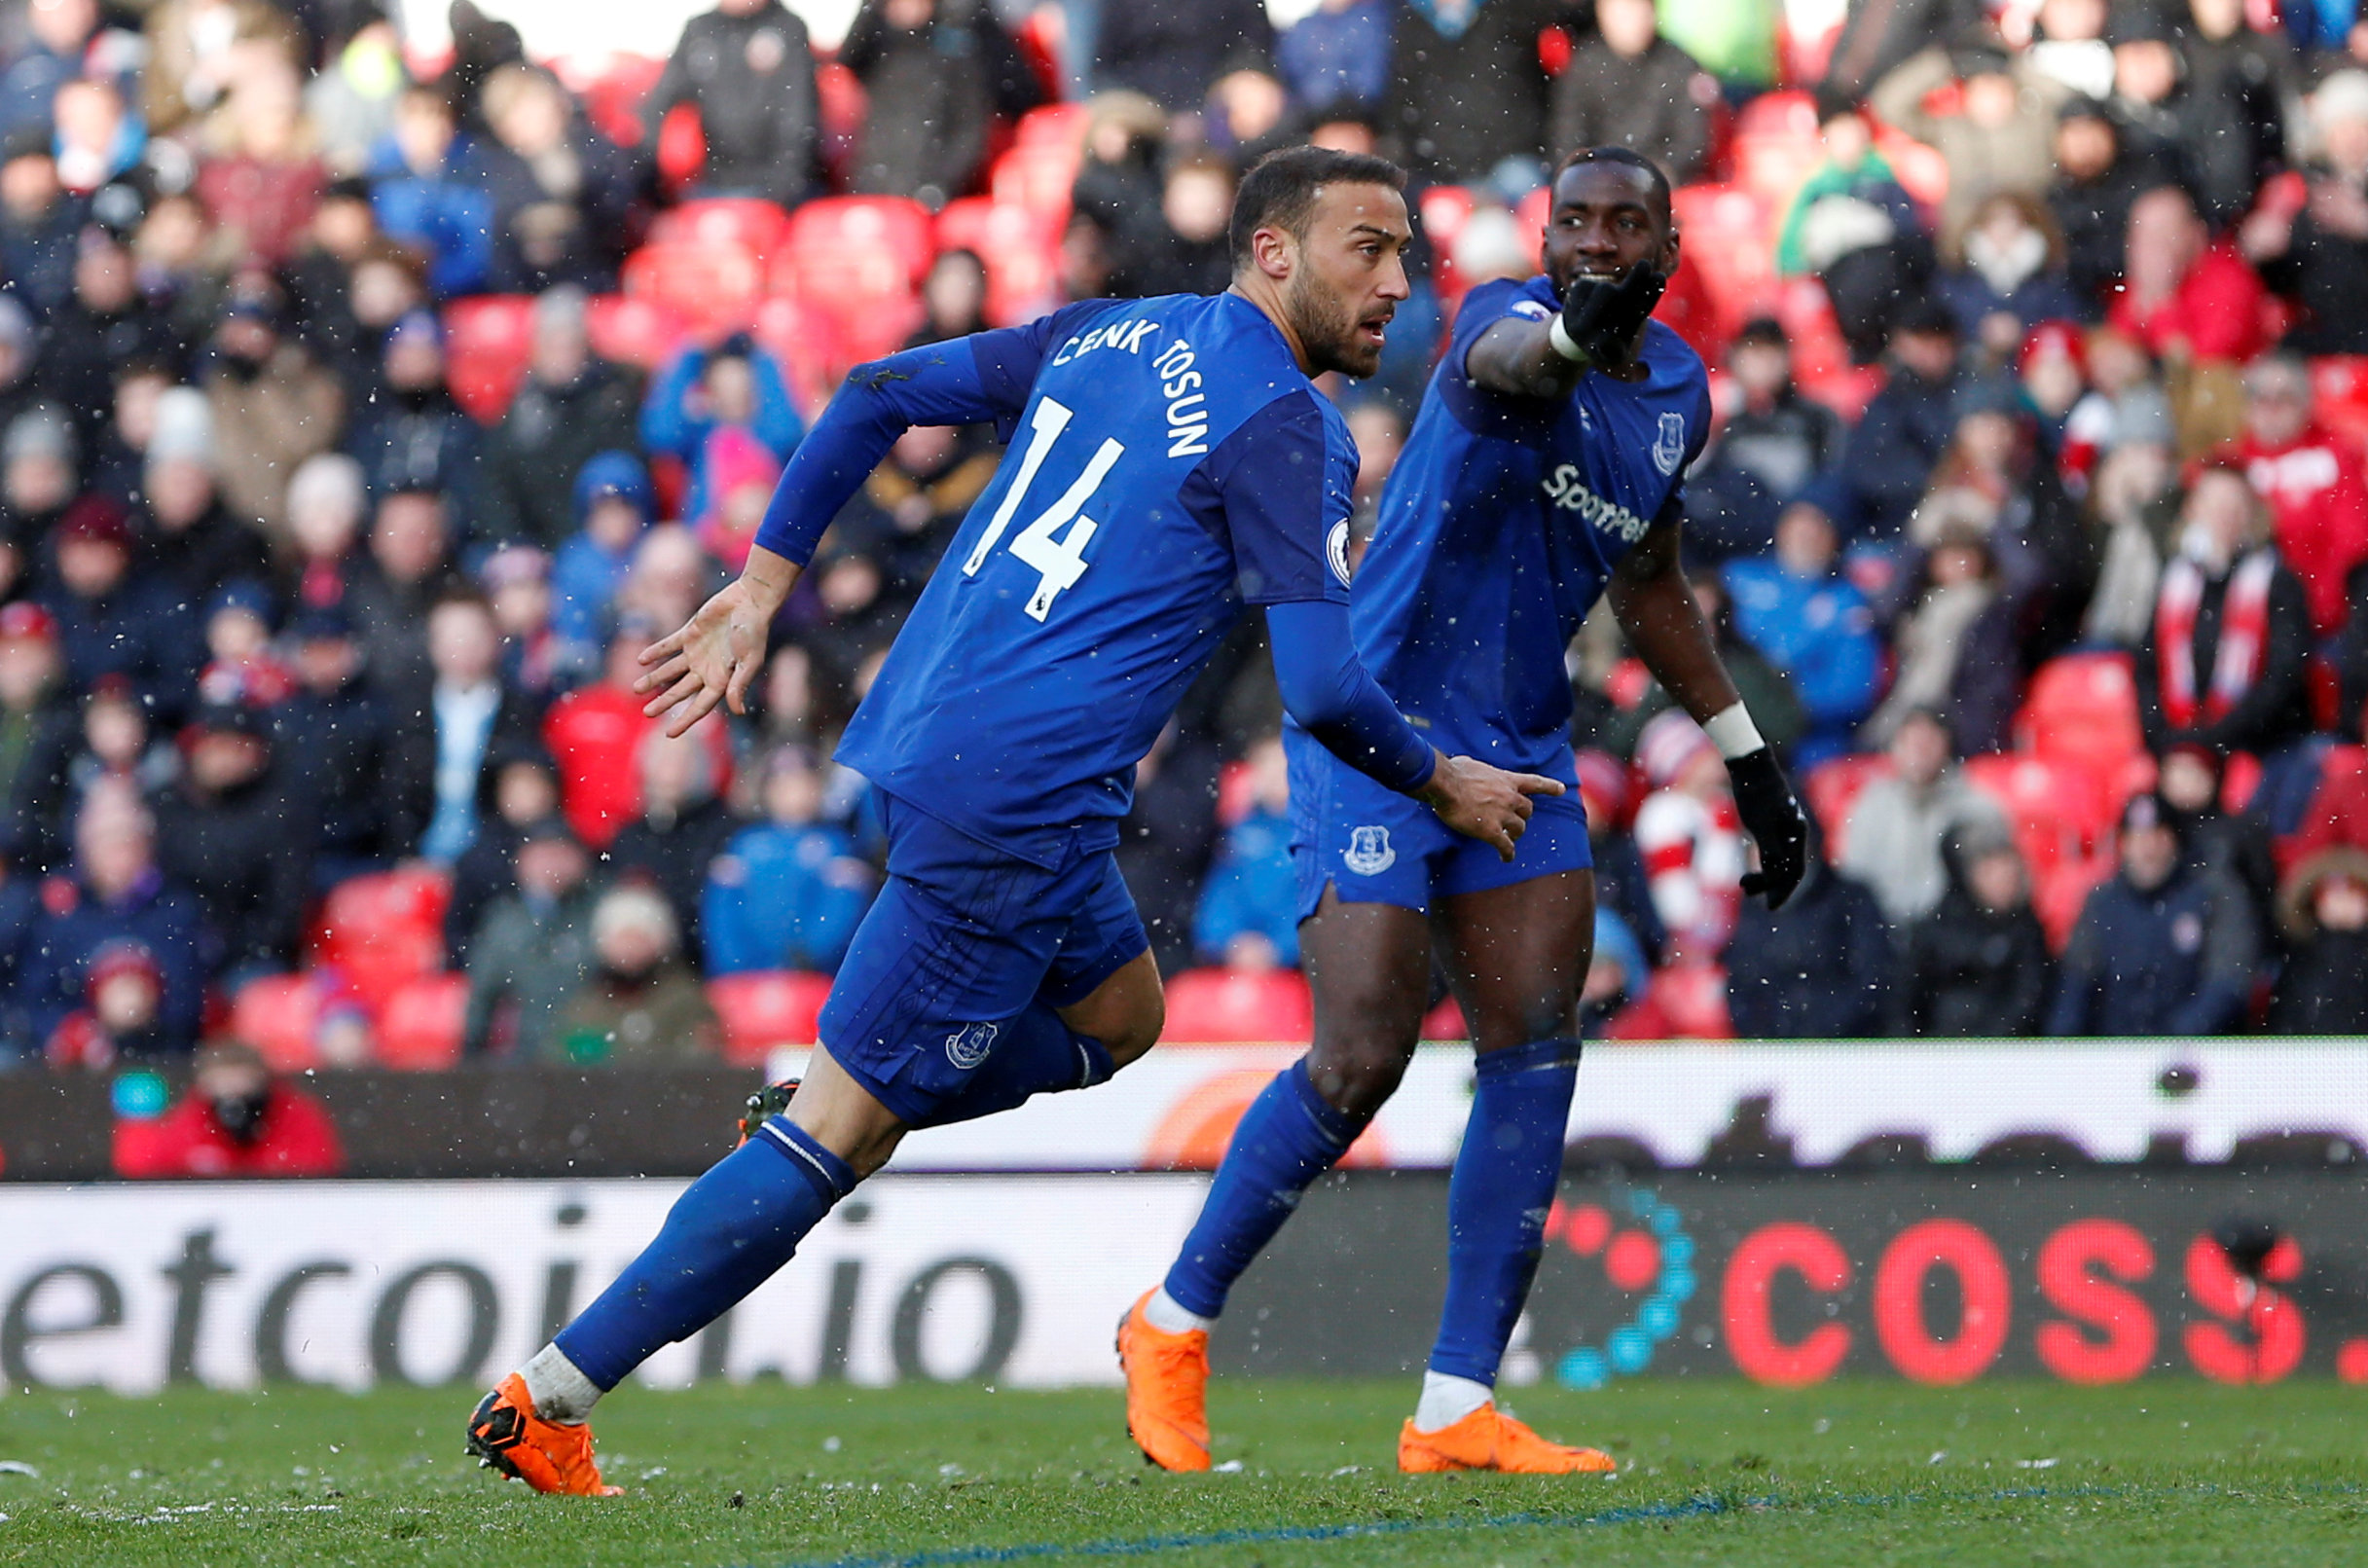 Football: Tosun lifts Everton to win over Stoke City